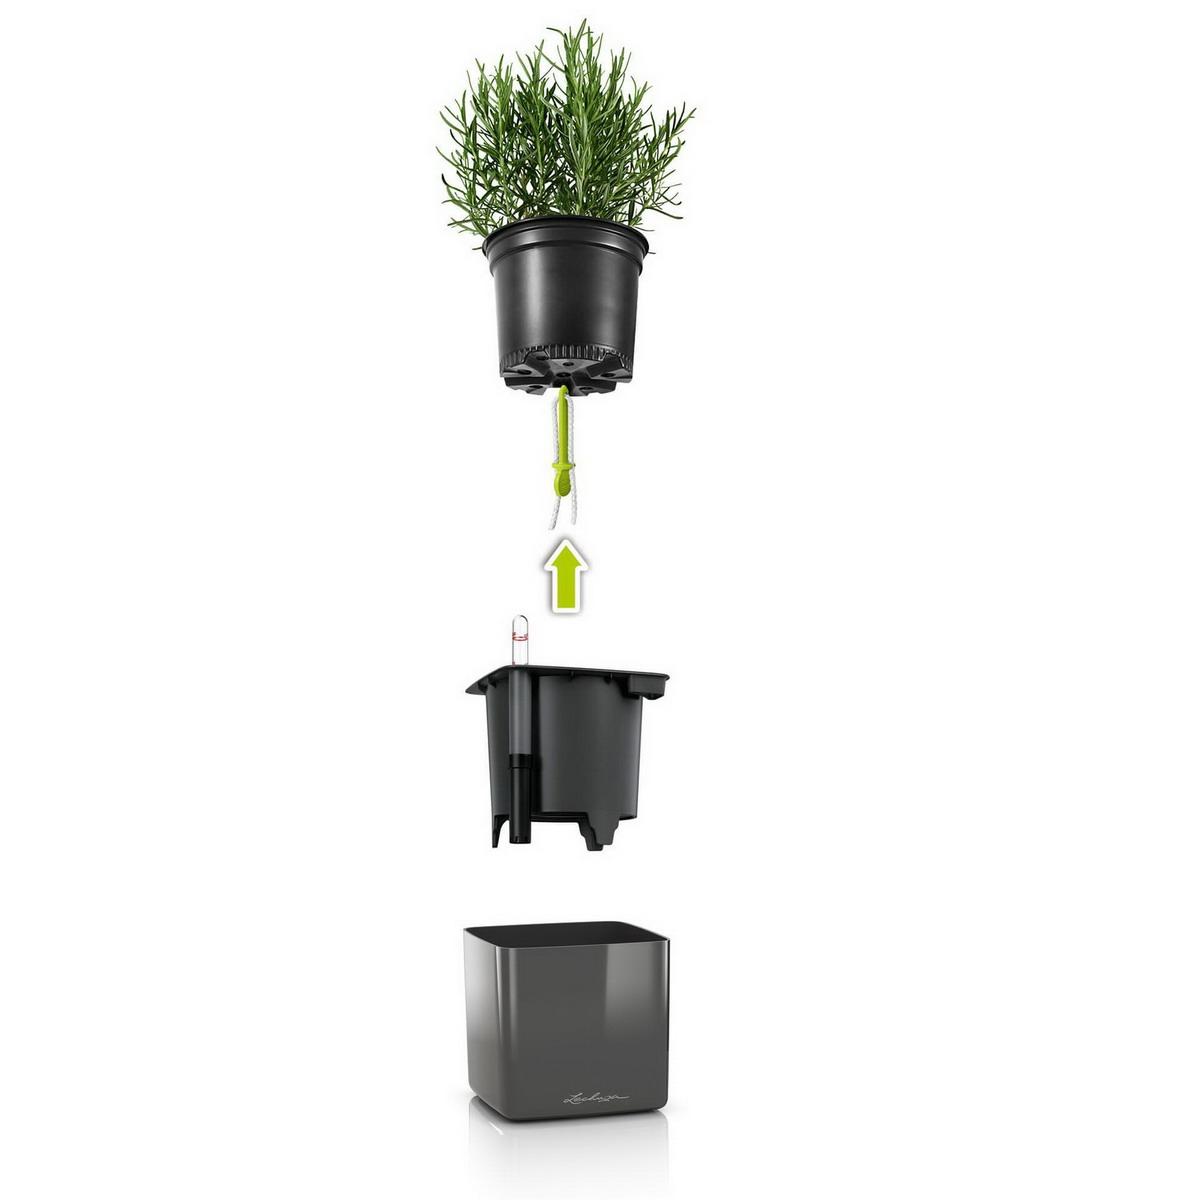 LECHUZA CANTO Stone 14 Graphite Black Poly Resin Table Self-watering Planter with Water Level Indicator H14 L14 W14 cm, 1.4L - citiplants.com